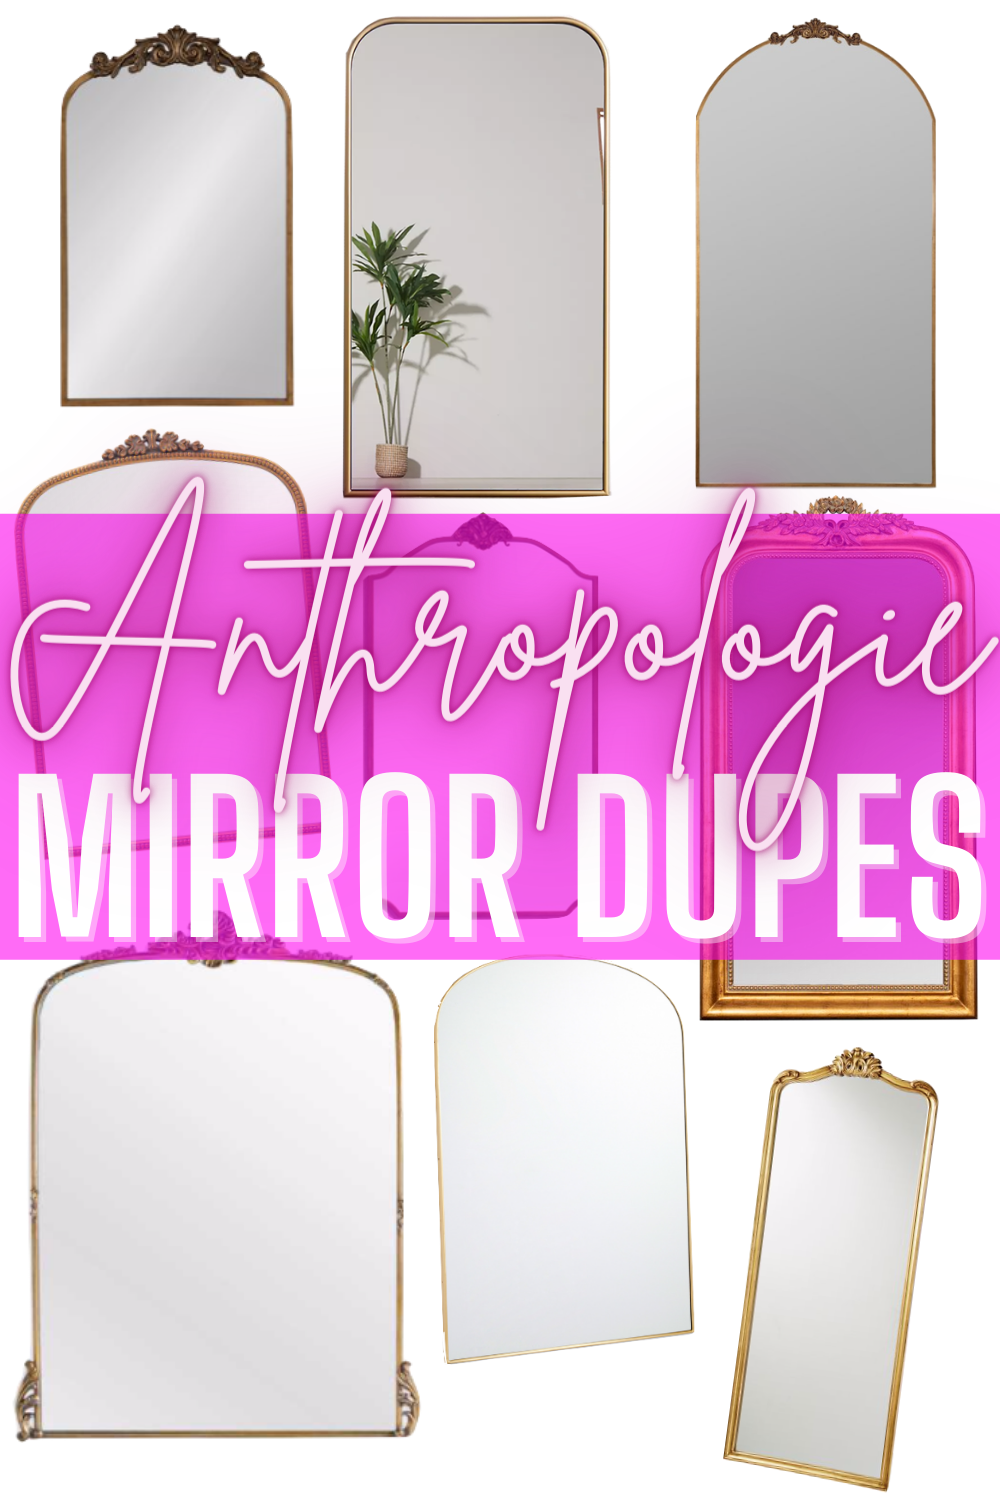 9 Anthropologie Primrose Mirror Dupes - In love with Anthrpologie's Primrose Mirror, but the price has you nauseous? Here are the top dupes for the brand's famed Gleaming Primrose mirror. | Anthropologie Floor Mirror